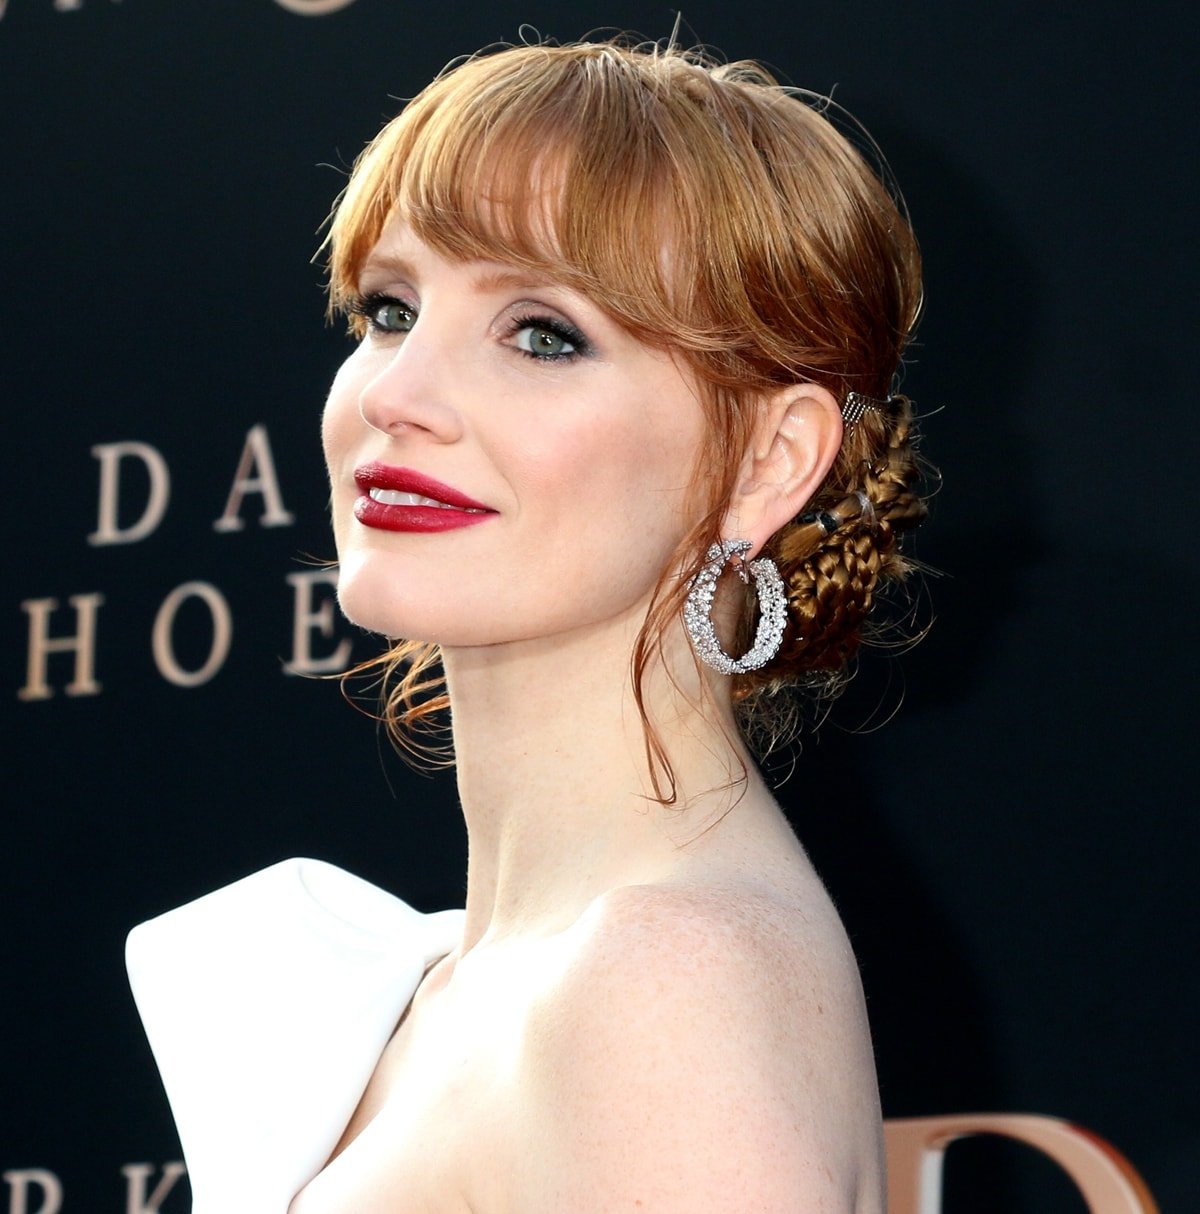 Jessica Chastain prefers supervillain roles as she doesn't like the long superhero contracts